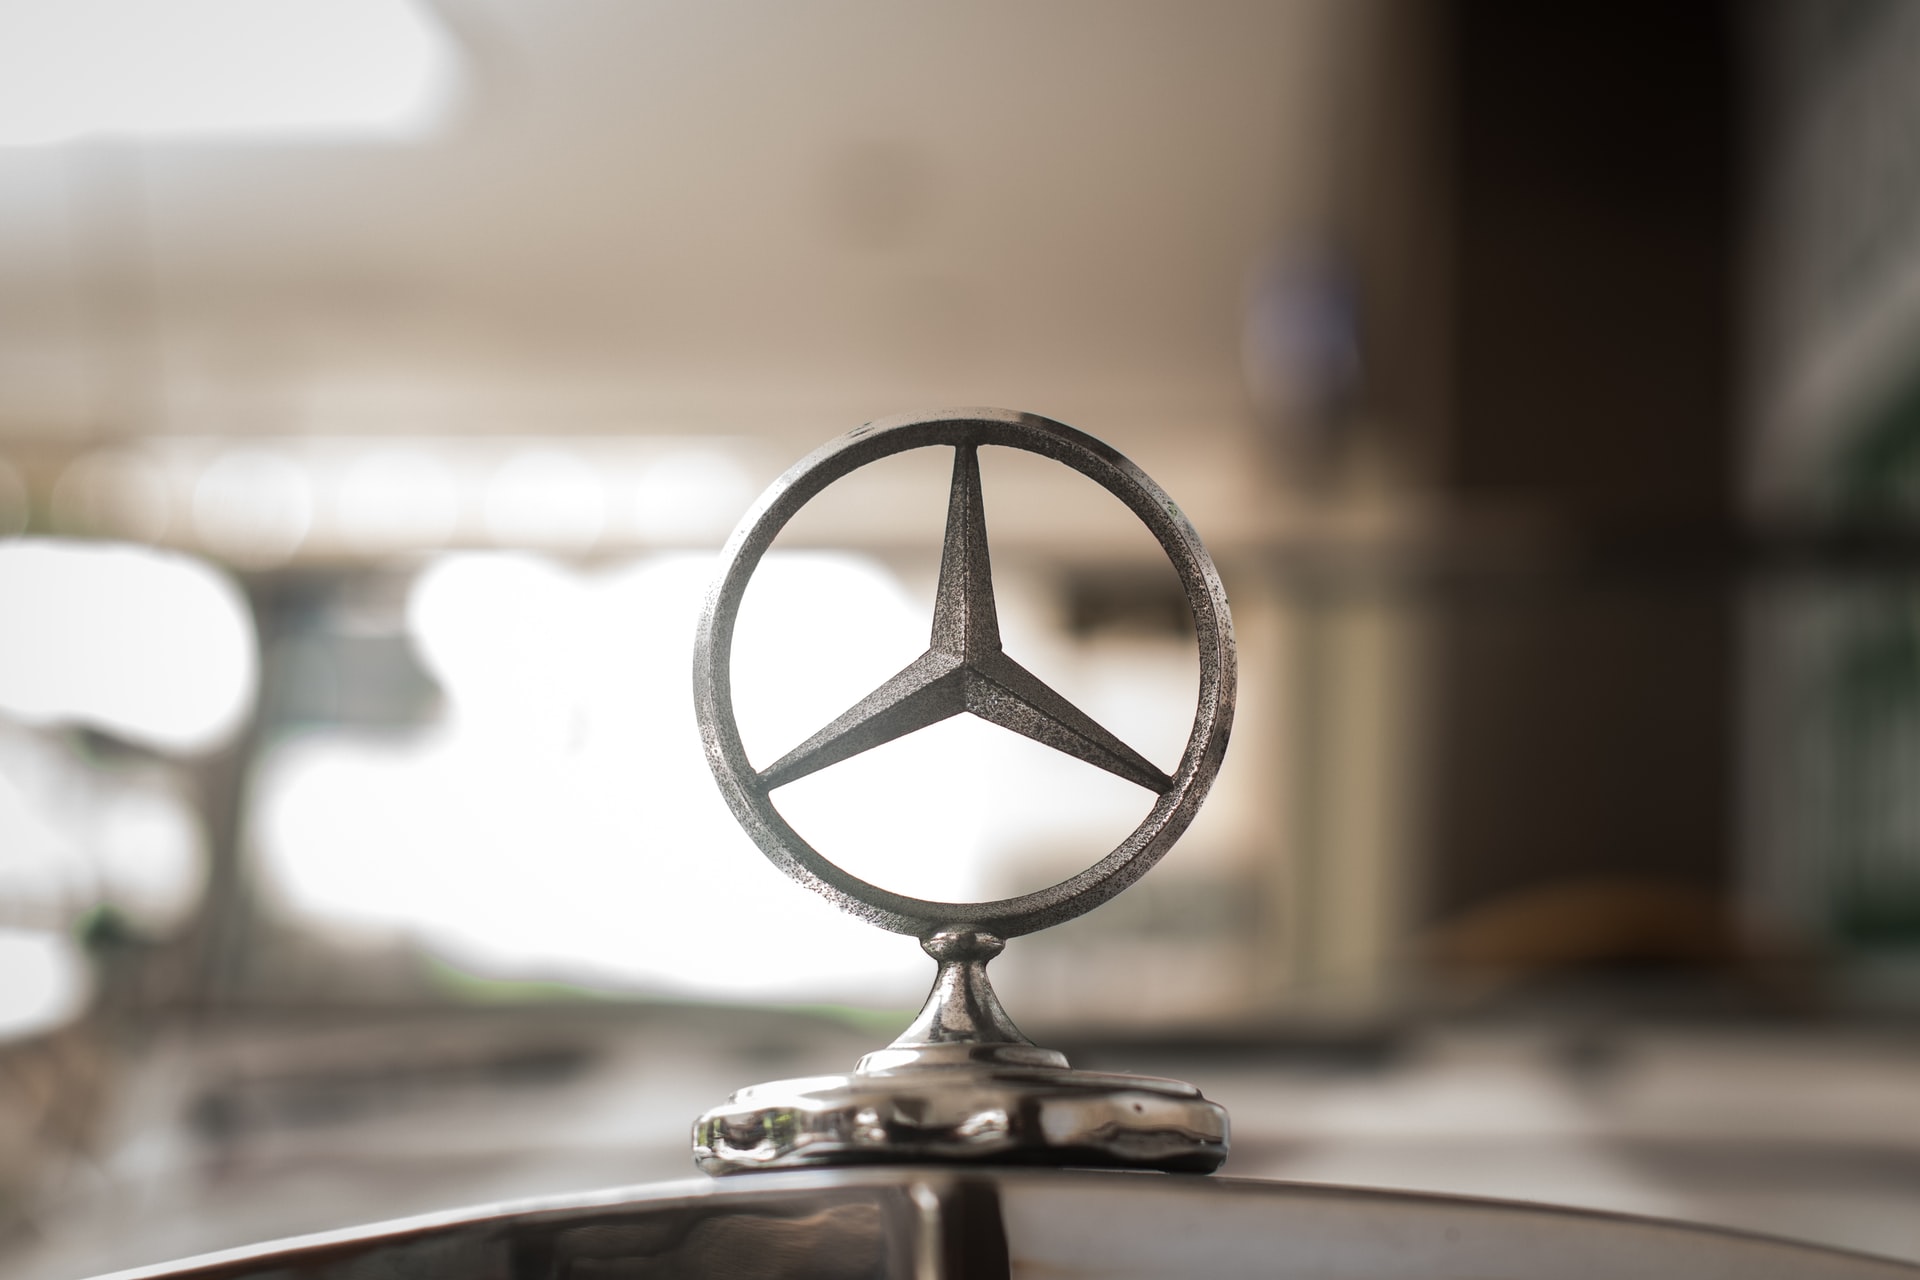 mercedes-benz-source-code-exposed-due-to-mistakenly-published-password